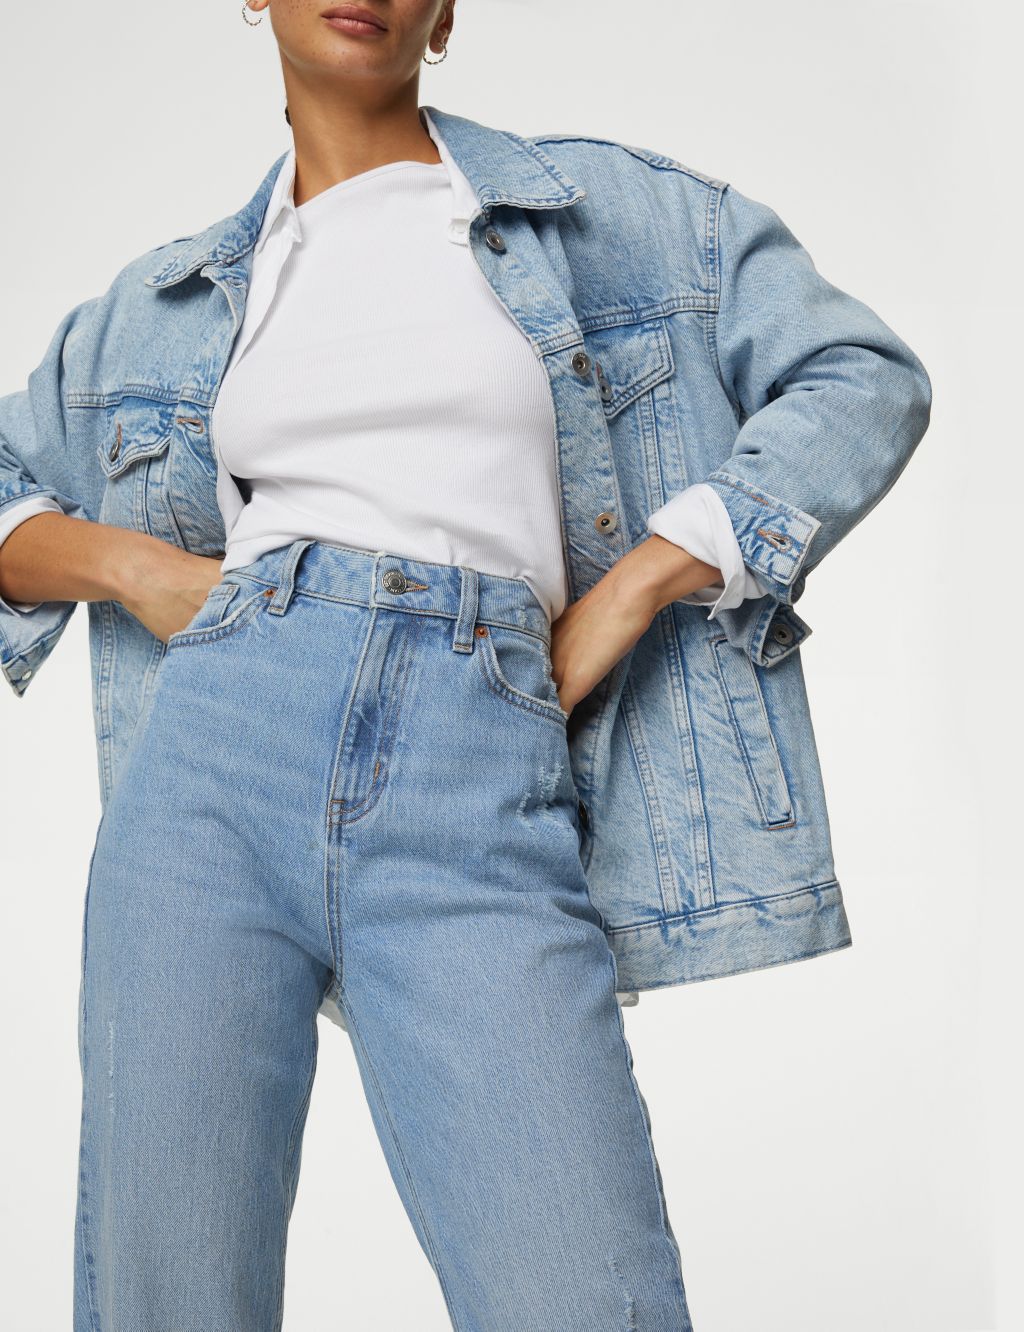 The Mom Jeans image 1